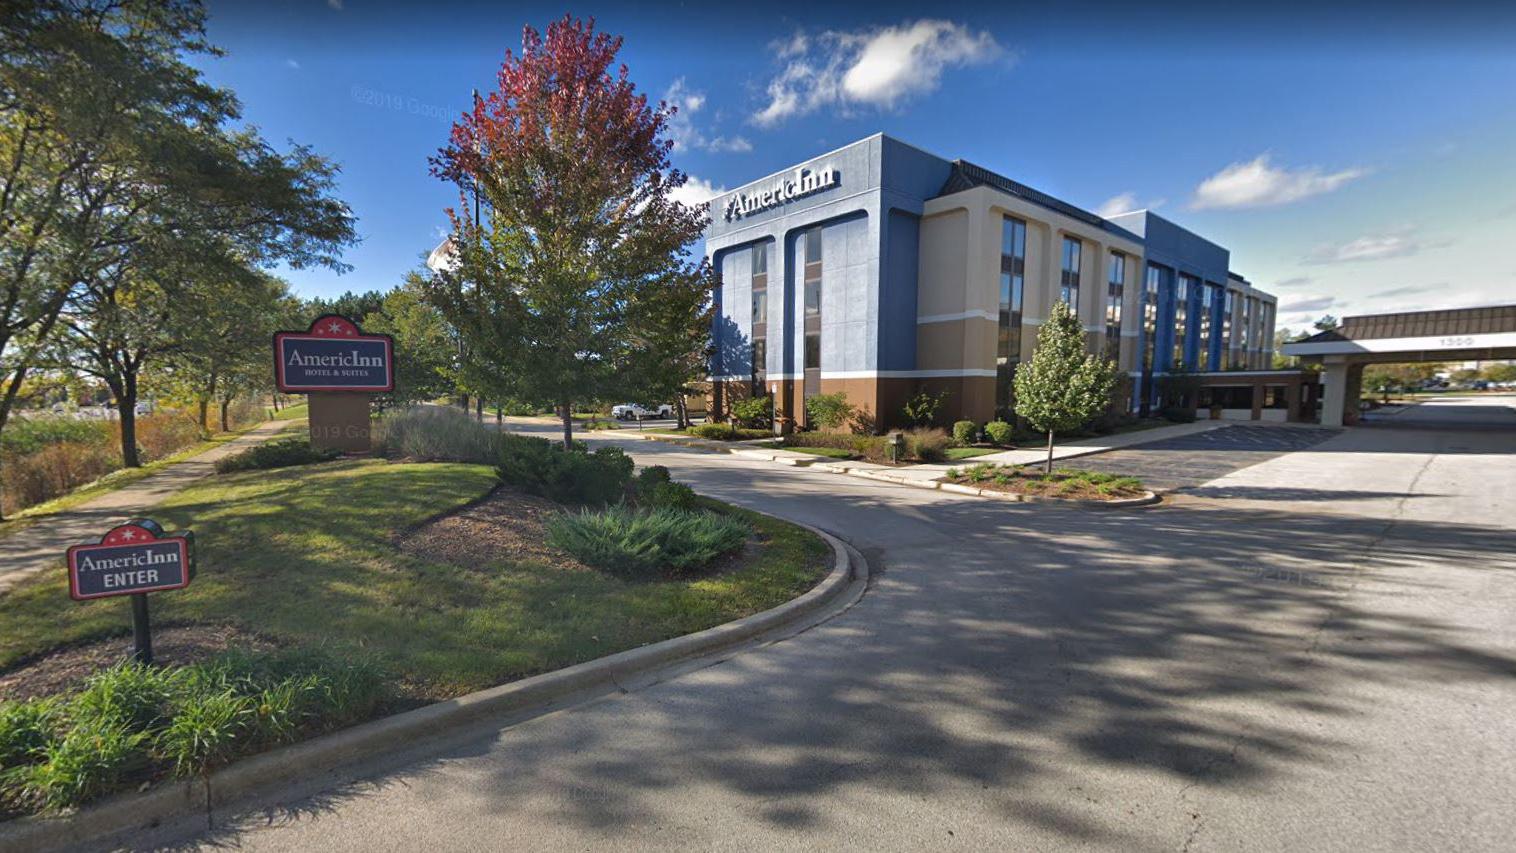 State and local health departments recently linked two confirmed cases of Legionnaires’ disease to the AmericInn by Wyndham Hotel, located at 1300 E. Higgins Road in Schaumburg. (Google Maps)